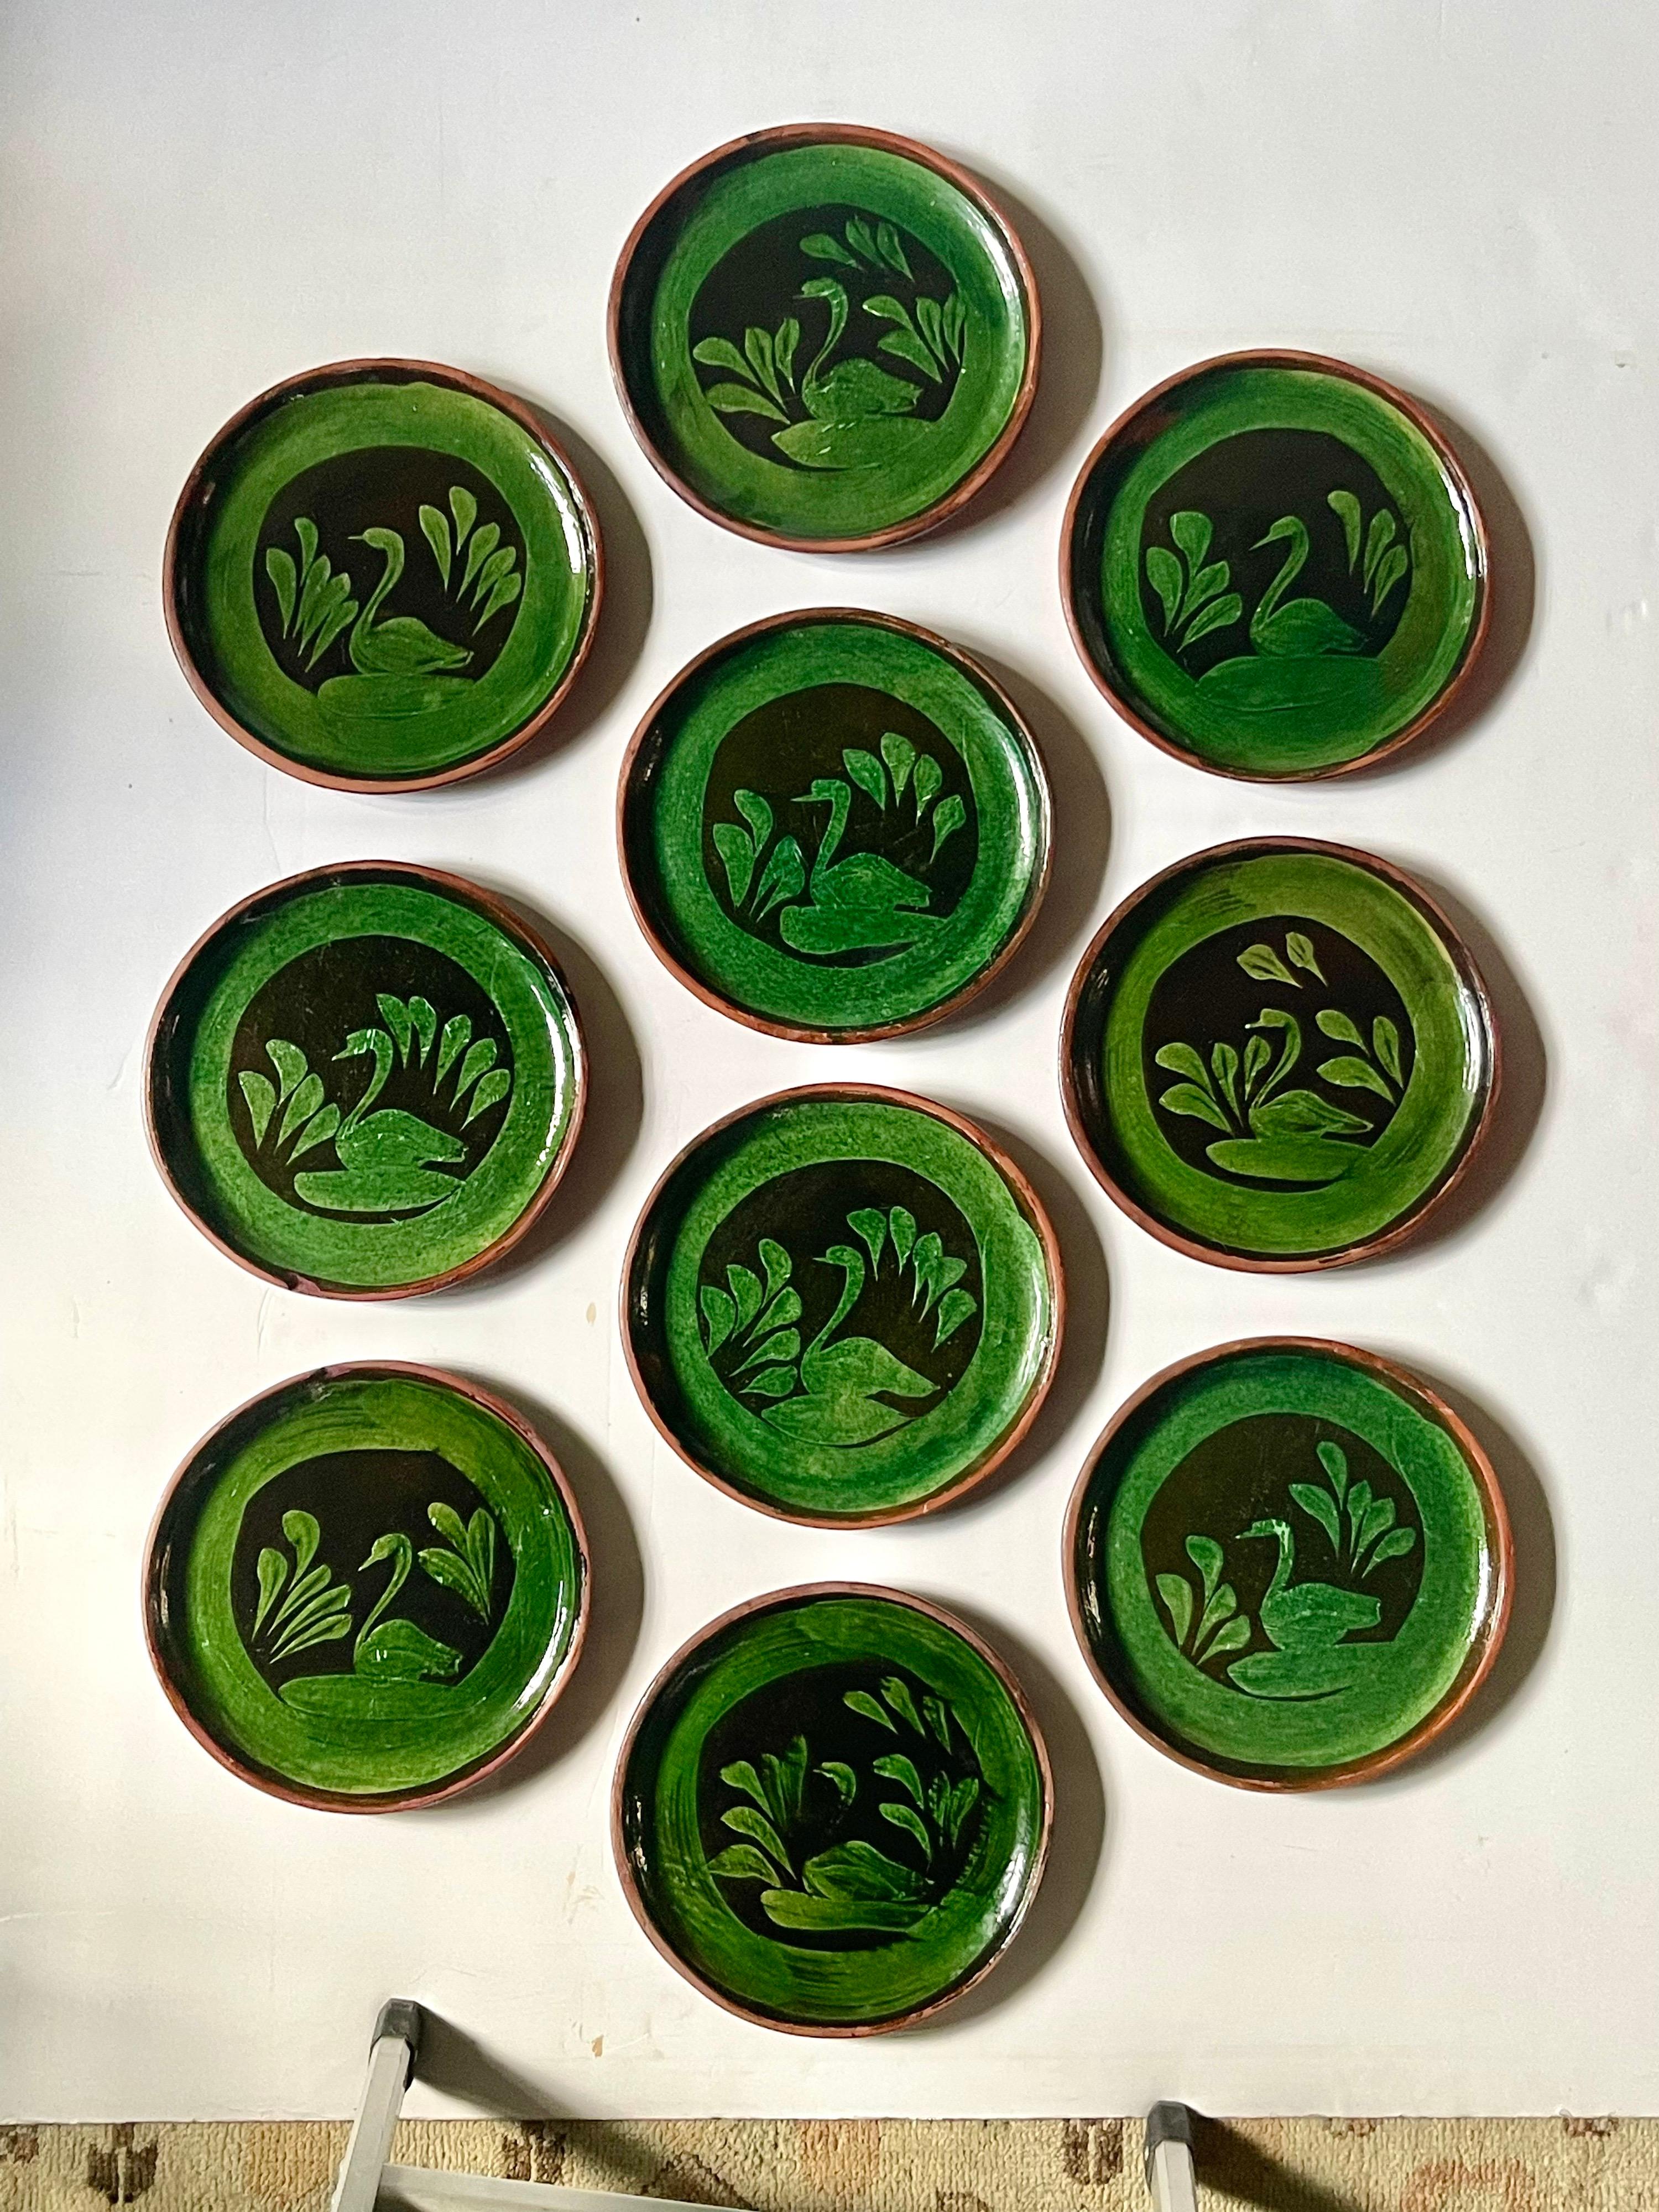 Beautiful vintage set of Patamban decorative pottery plates made by folk artists in Michoacán, Mexico. The round plates feature a rich green glazing on the front with swan designs in an off-black relief. Perfect for cabinet display or a plate wall!